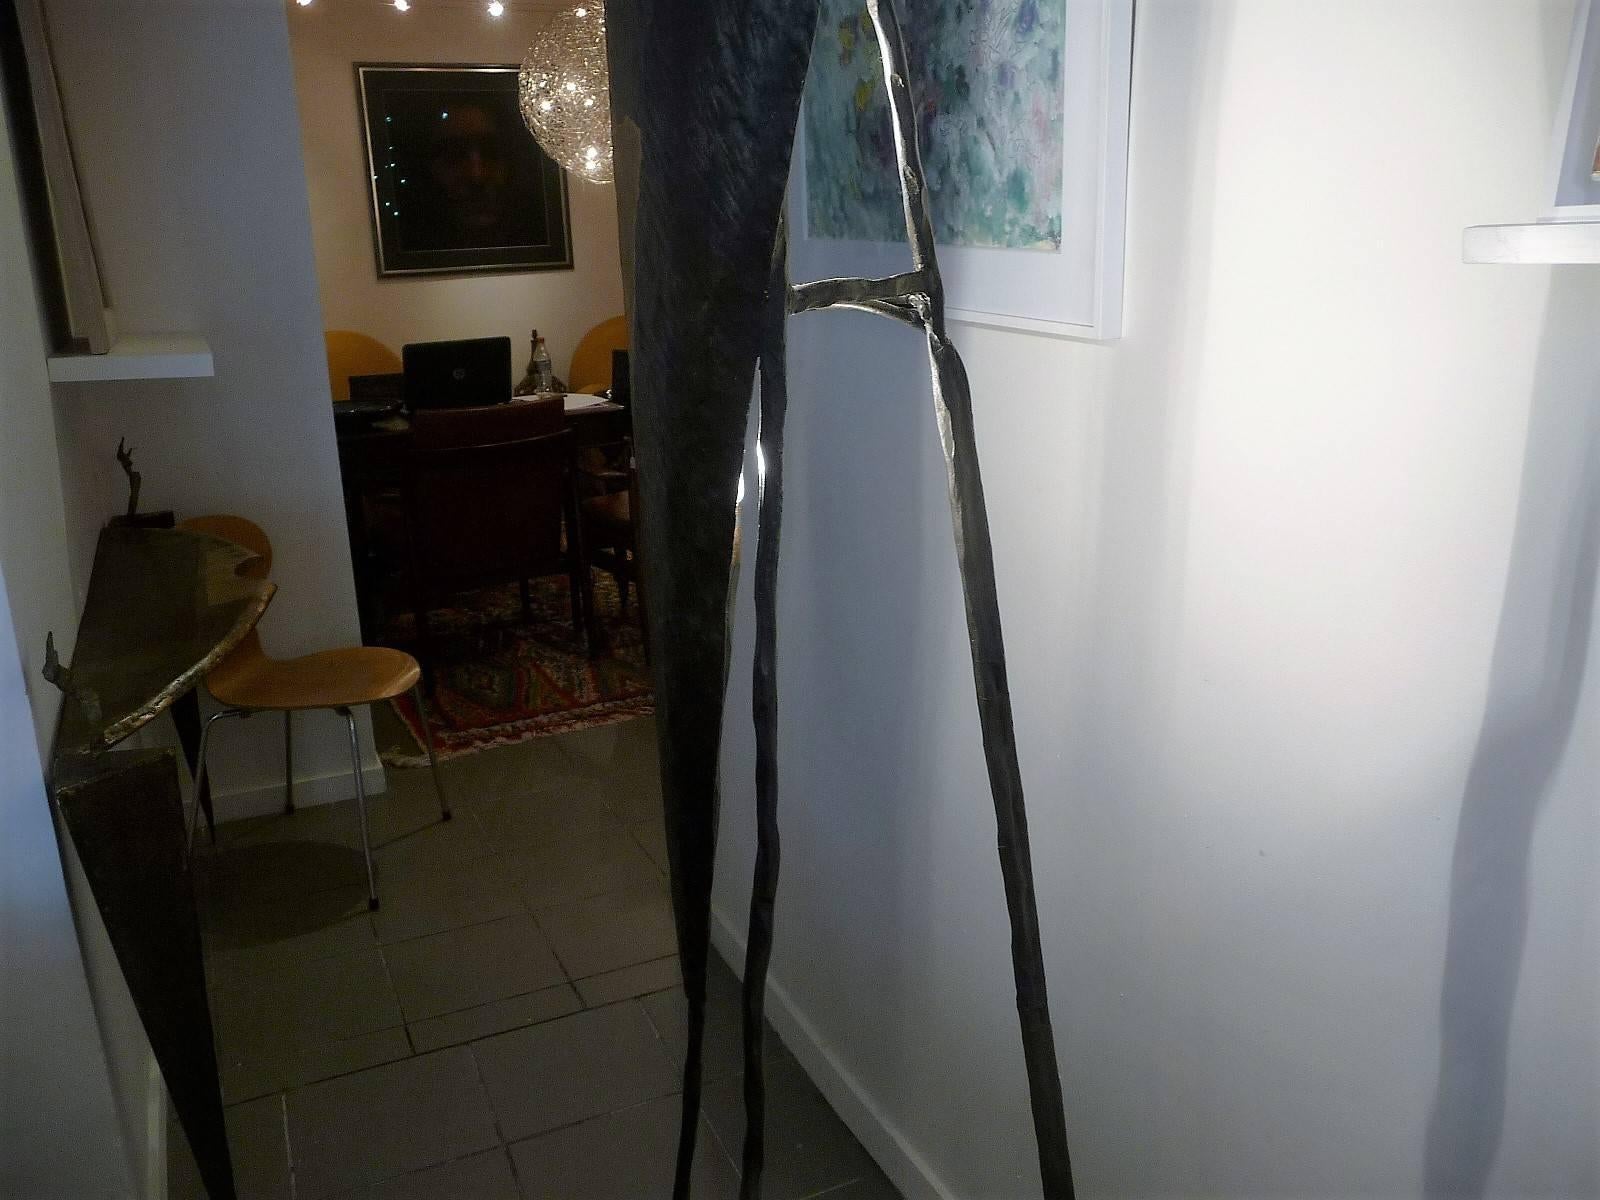 Exceptional large floor lamp iron sculpture art by Jean-Jacques Argueyrolles. Brutalist design, wrought iron and gold leaf decoration. One of a kind art piece from 1990s in perfect conditions.